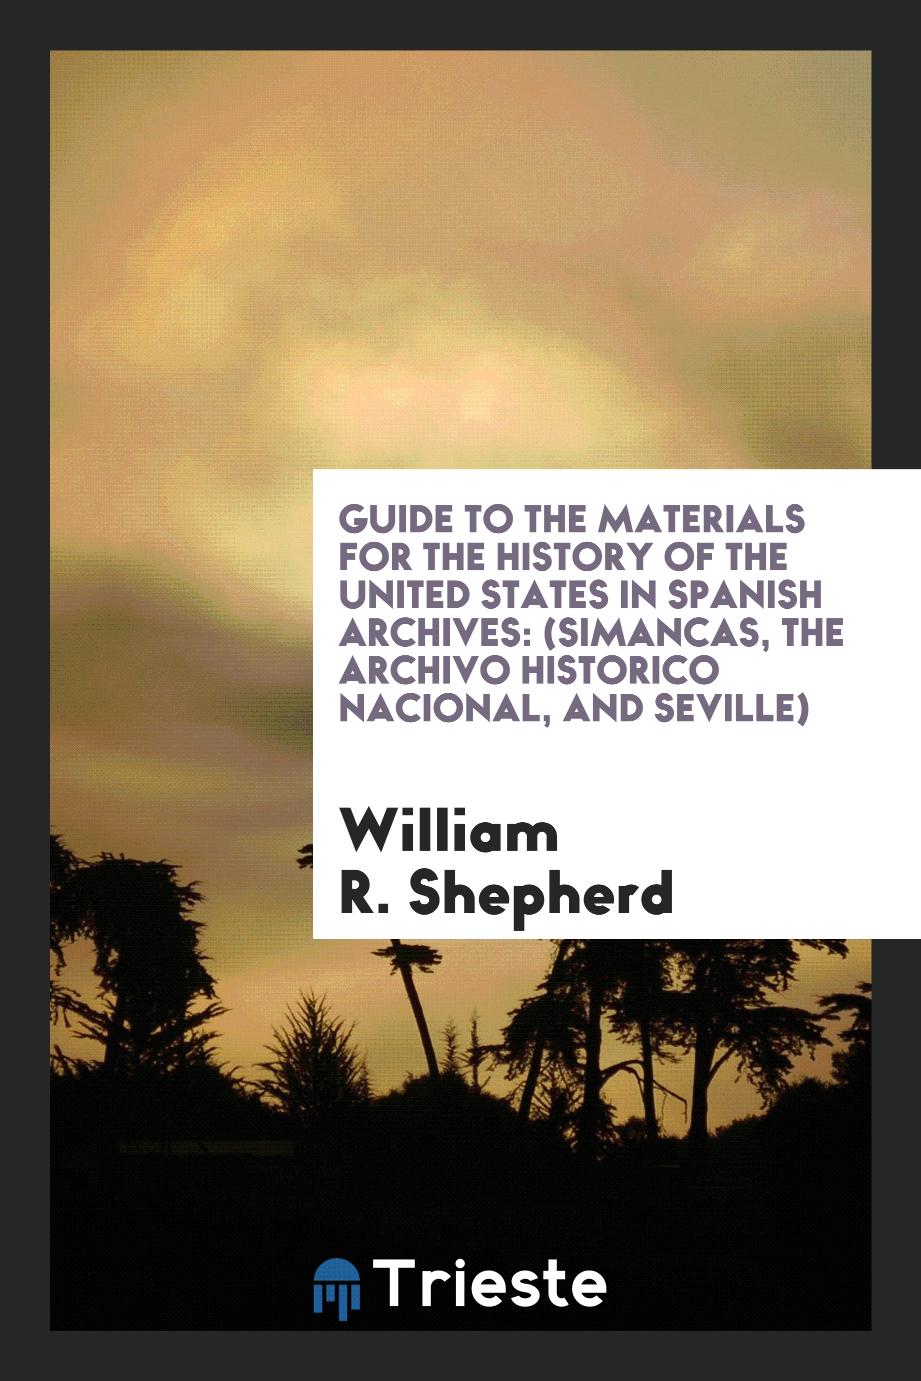 Guide to the Materials for the History of the United States in Spanish Archives: (Simancas, the Archivo Historico Nacional, and Seville)